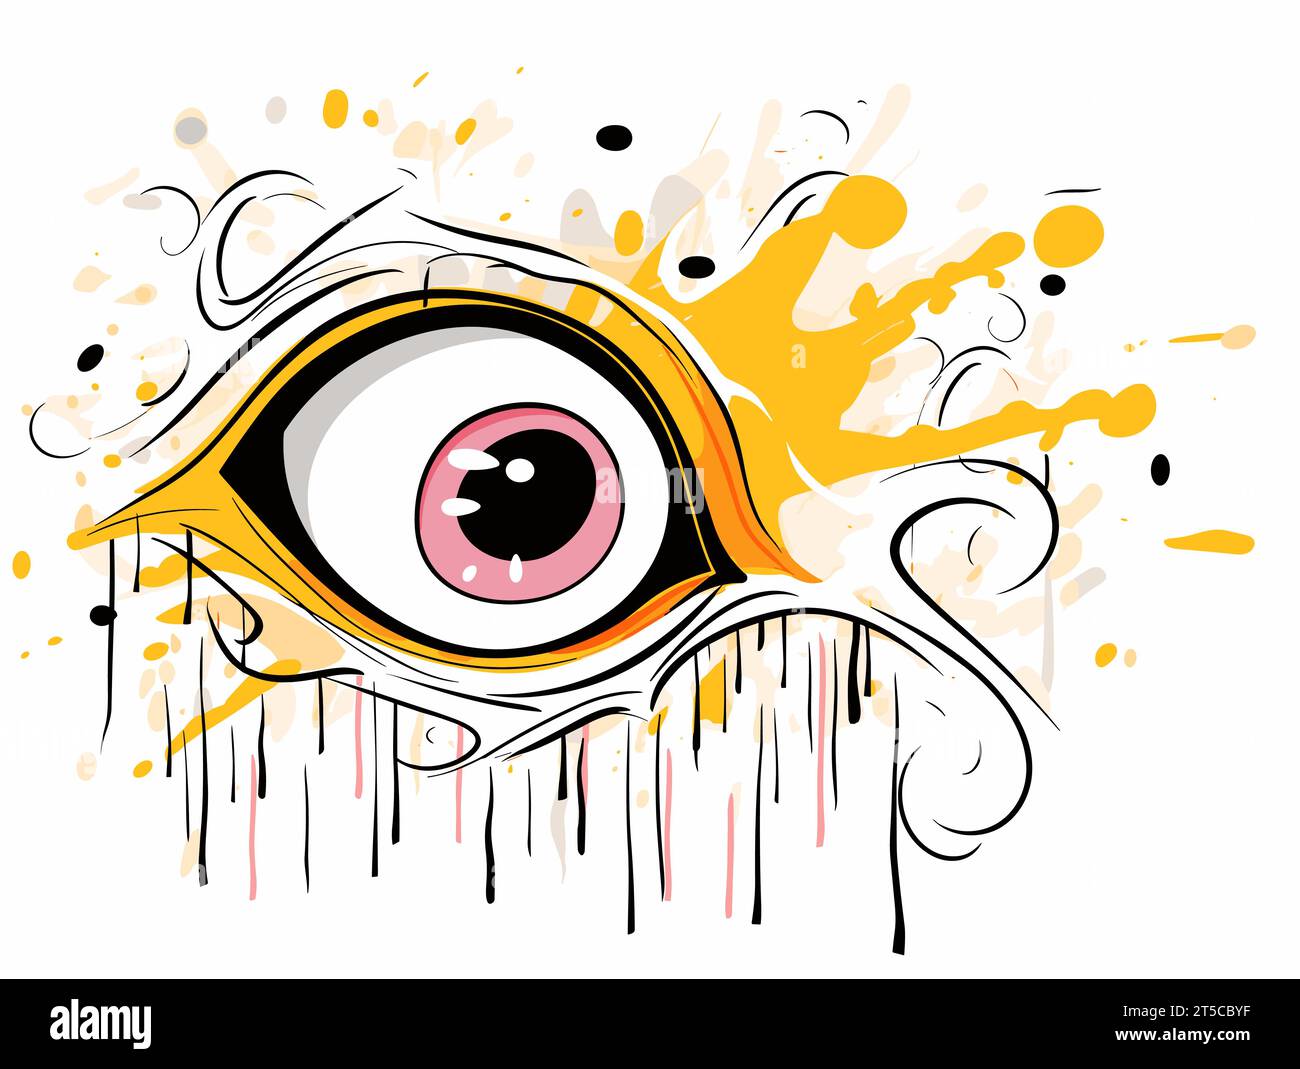 Drawing of Fun cartoon blot with surprise in eyes illustration separated, sweeping overdrawn lines. Stock Vector